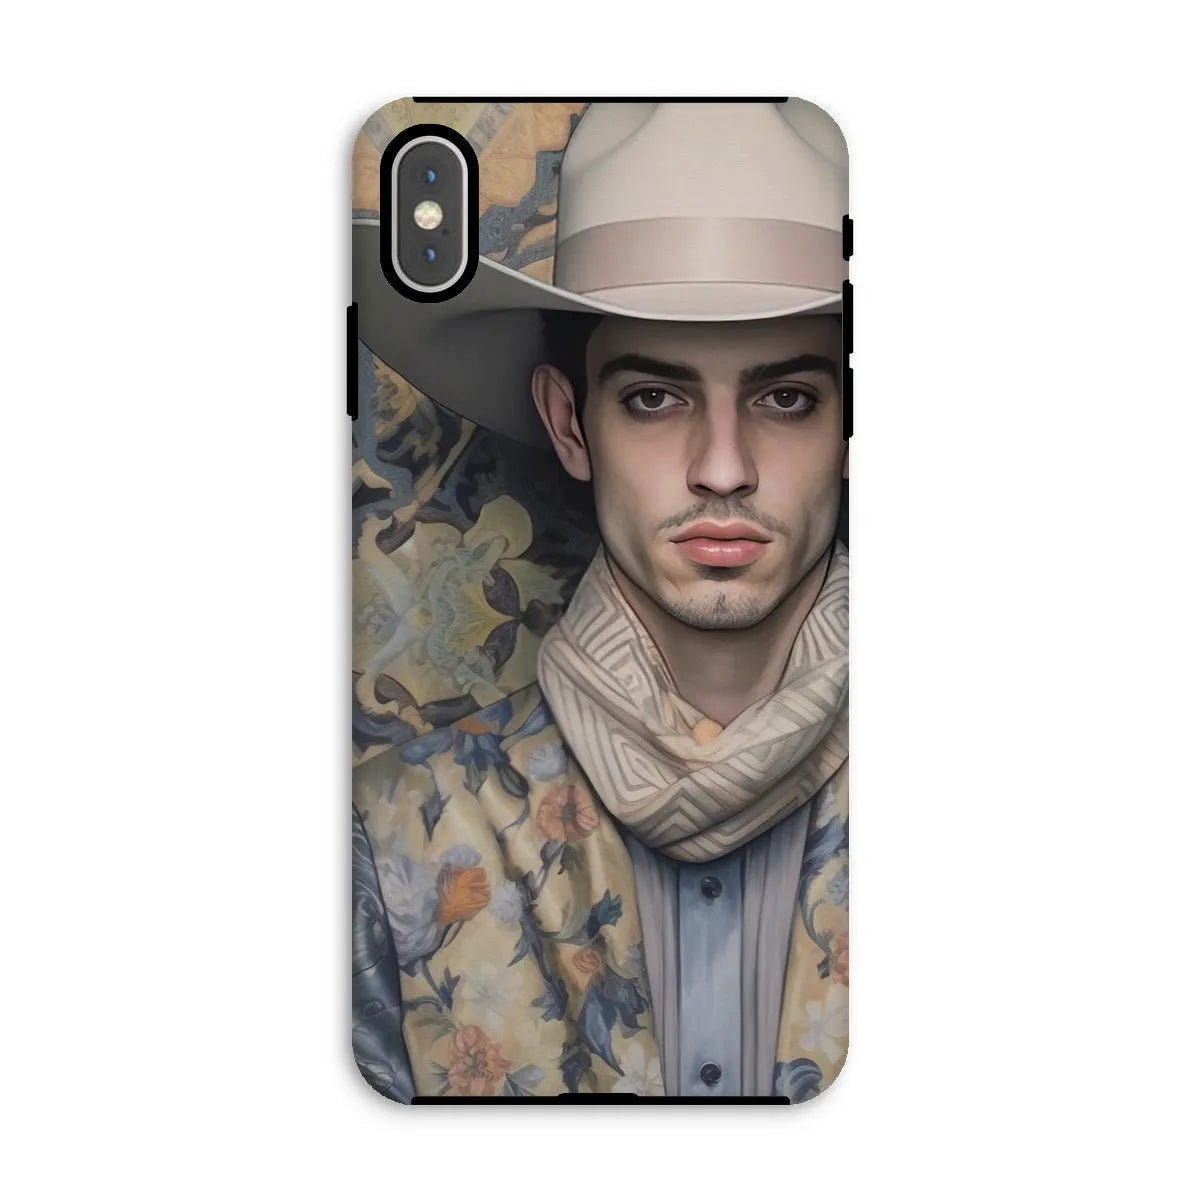 Farzad The Gay Cowboy - Dandy Gay Men Art Phone Case - Iphone Xs Max / Matte - Mobile Phone Cases - Aesthetic Art